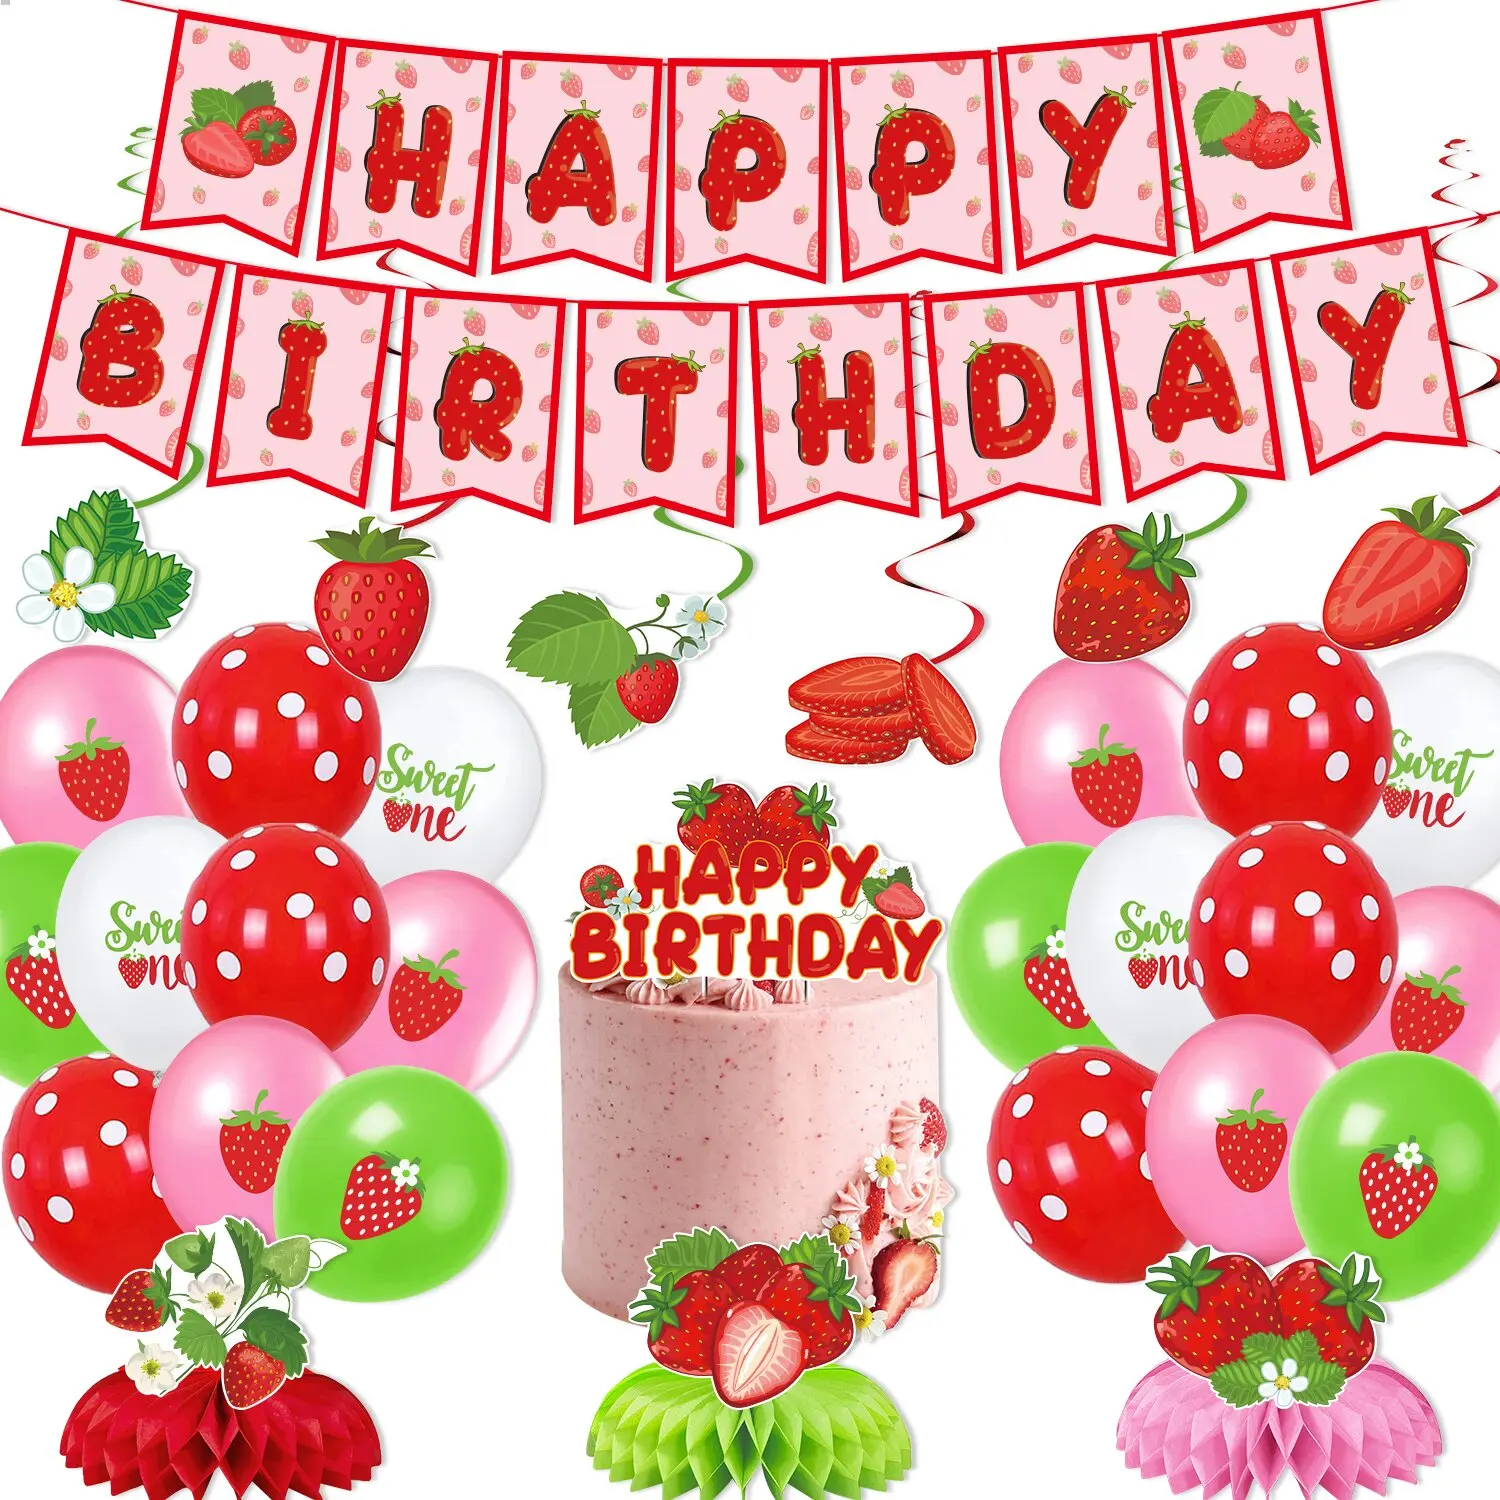 

Sursurprise Berry Sweet Strawberry Theme Birthday Party Decorations Red Pink Balloons Banner Cake Topper Honeycomb Centerpiece